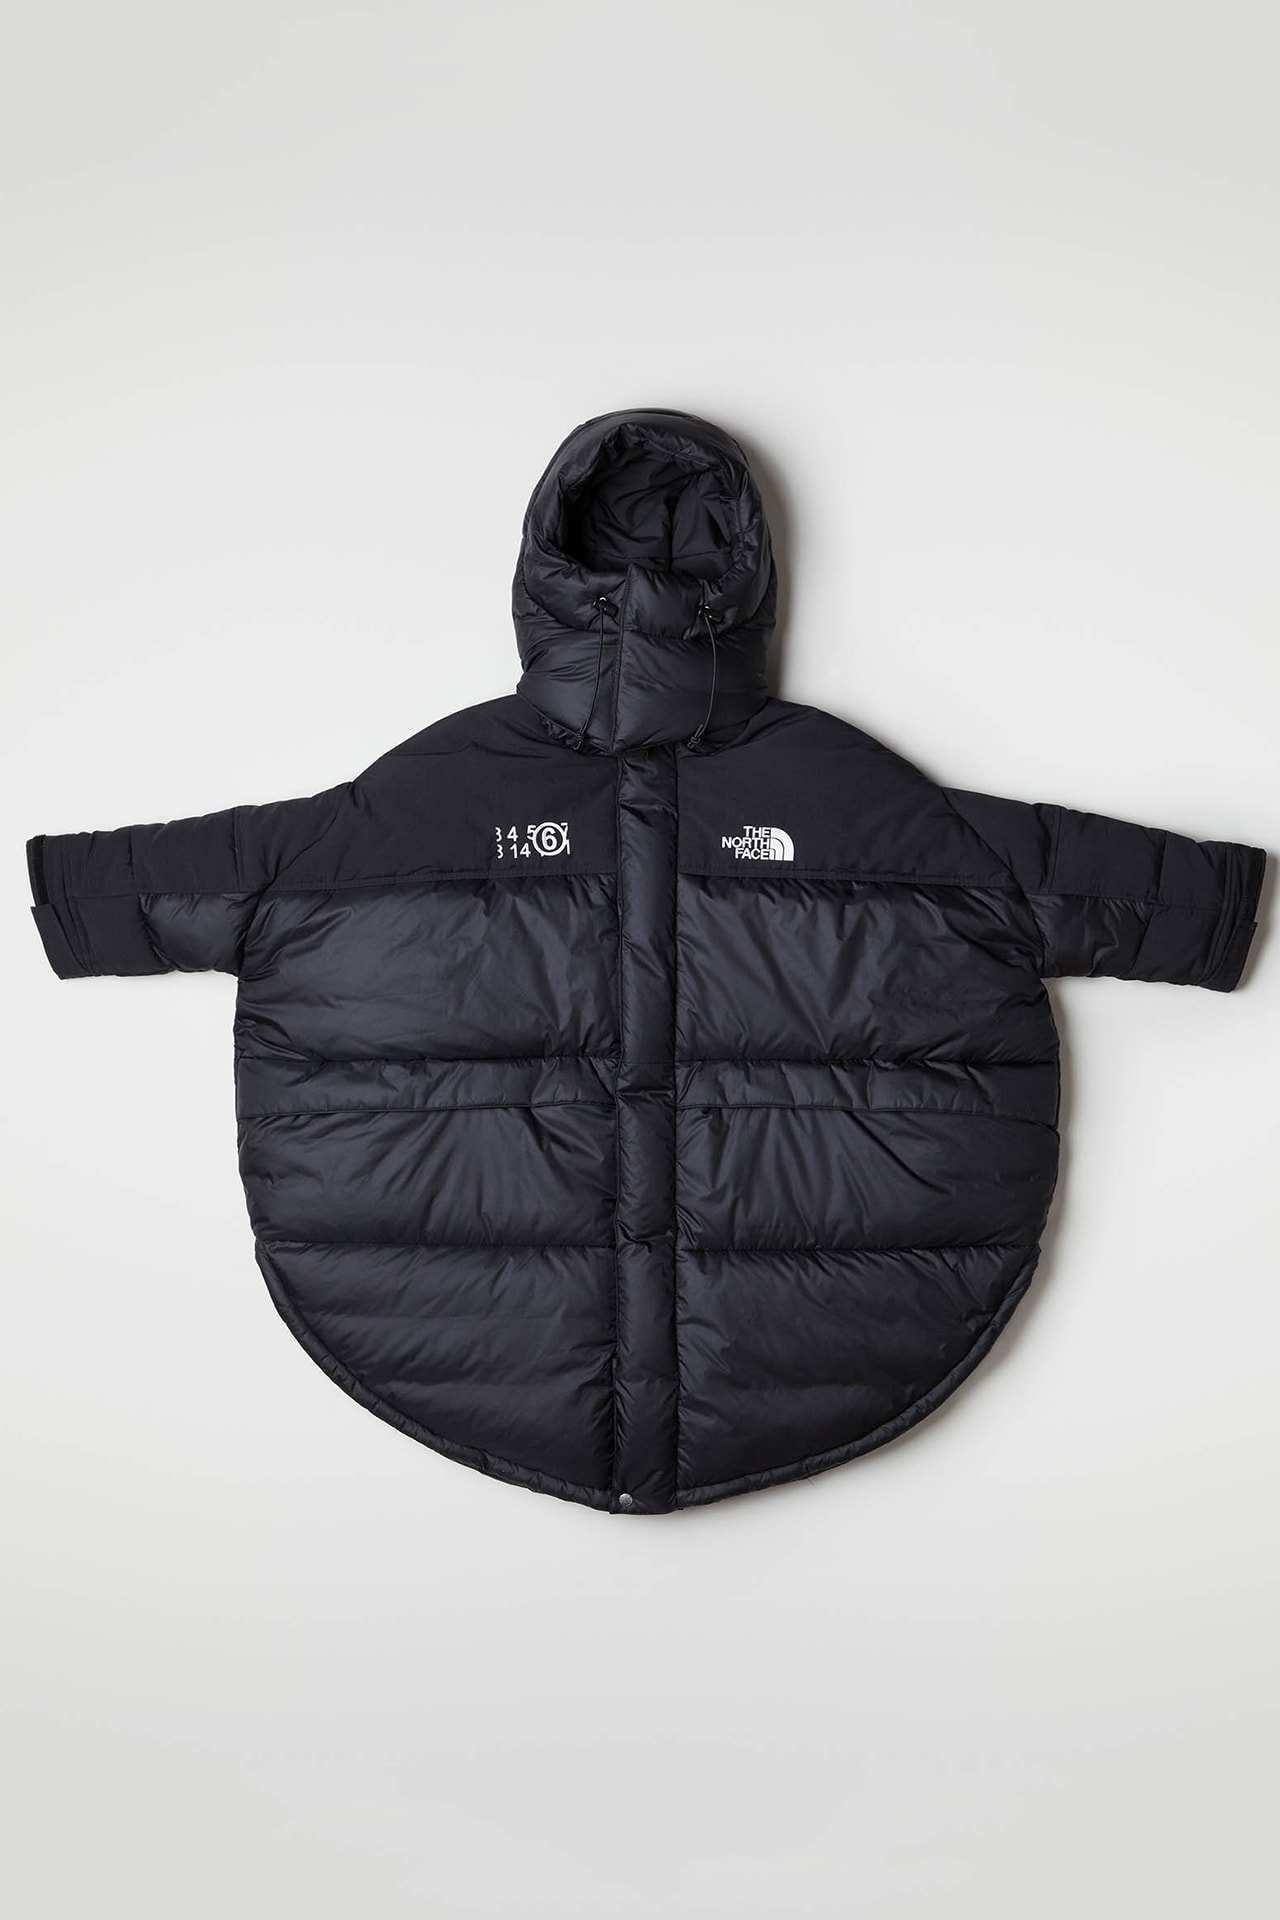 MM6 Maison Margiela The North Face Collaboration Fall Winter 2020 Circle Himalayan Parker Puffer Jacket Black